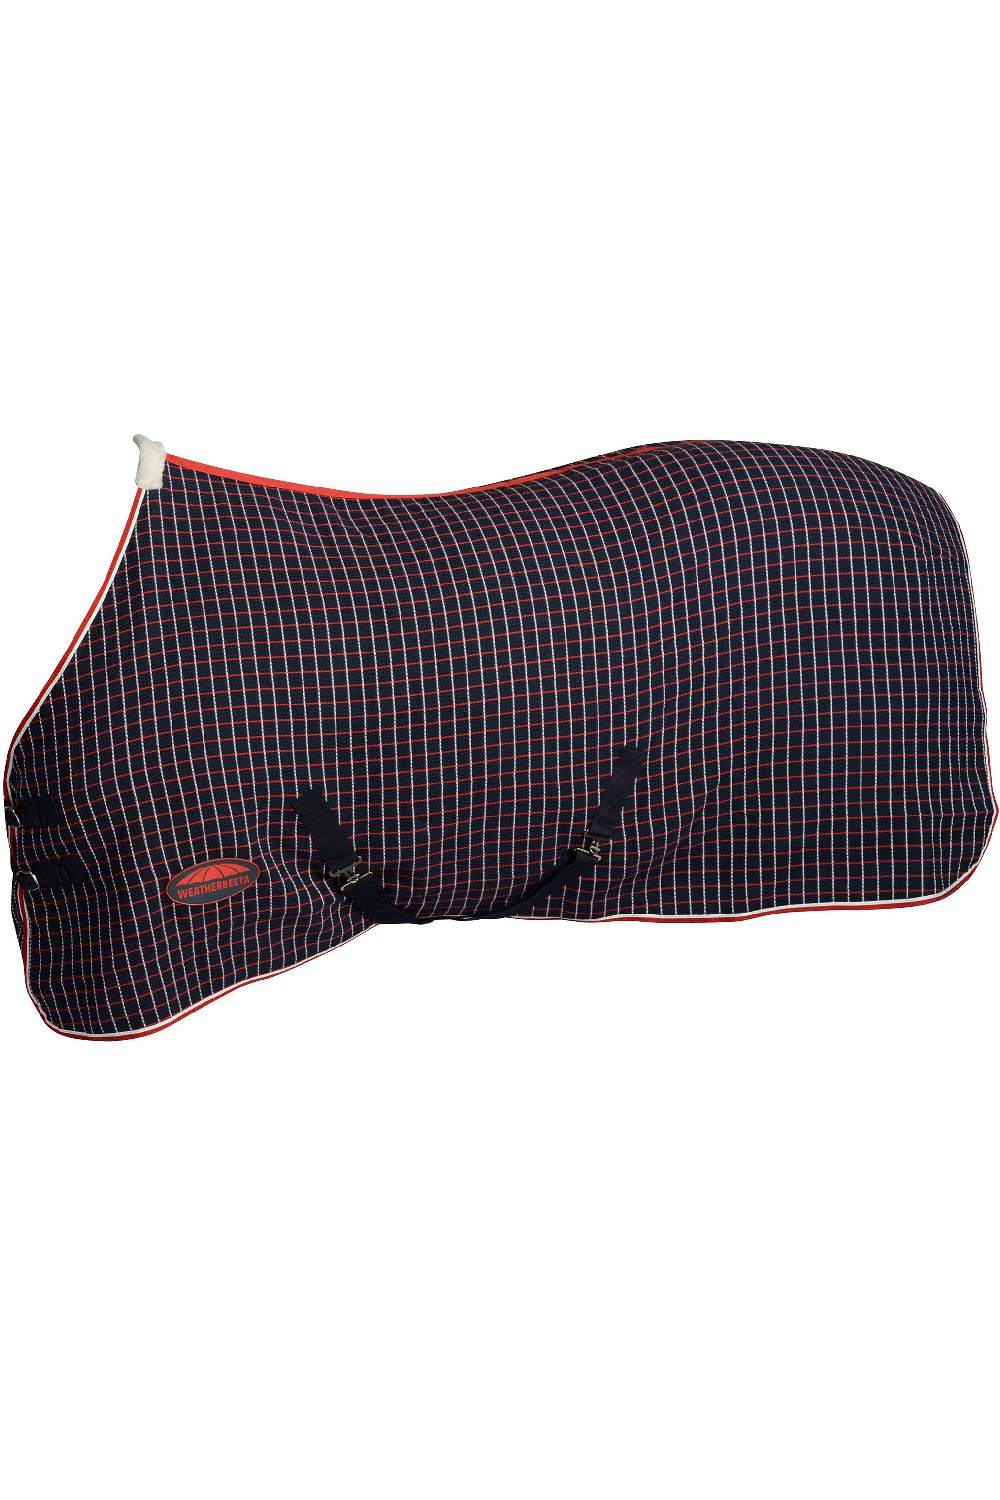 WeatherBeeta Waffle Cooler Standard Neck in Navy/Red/White